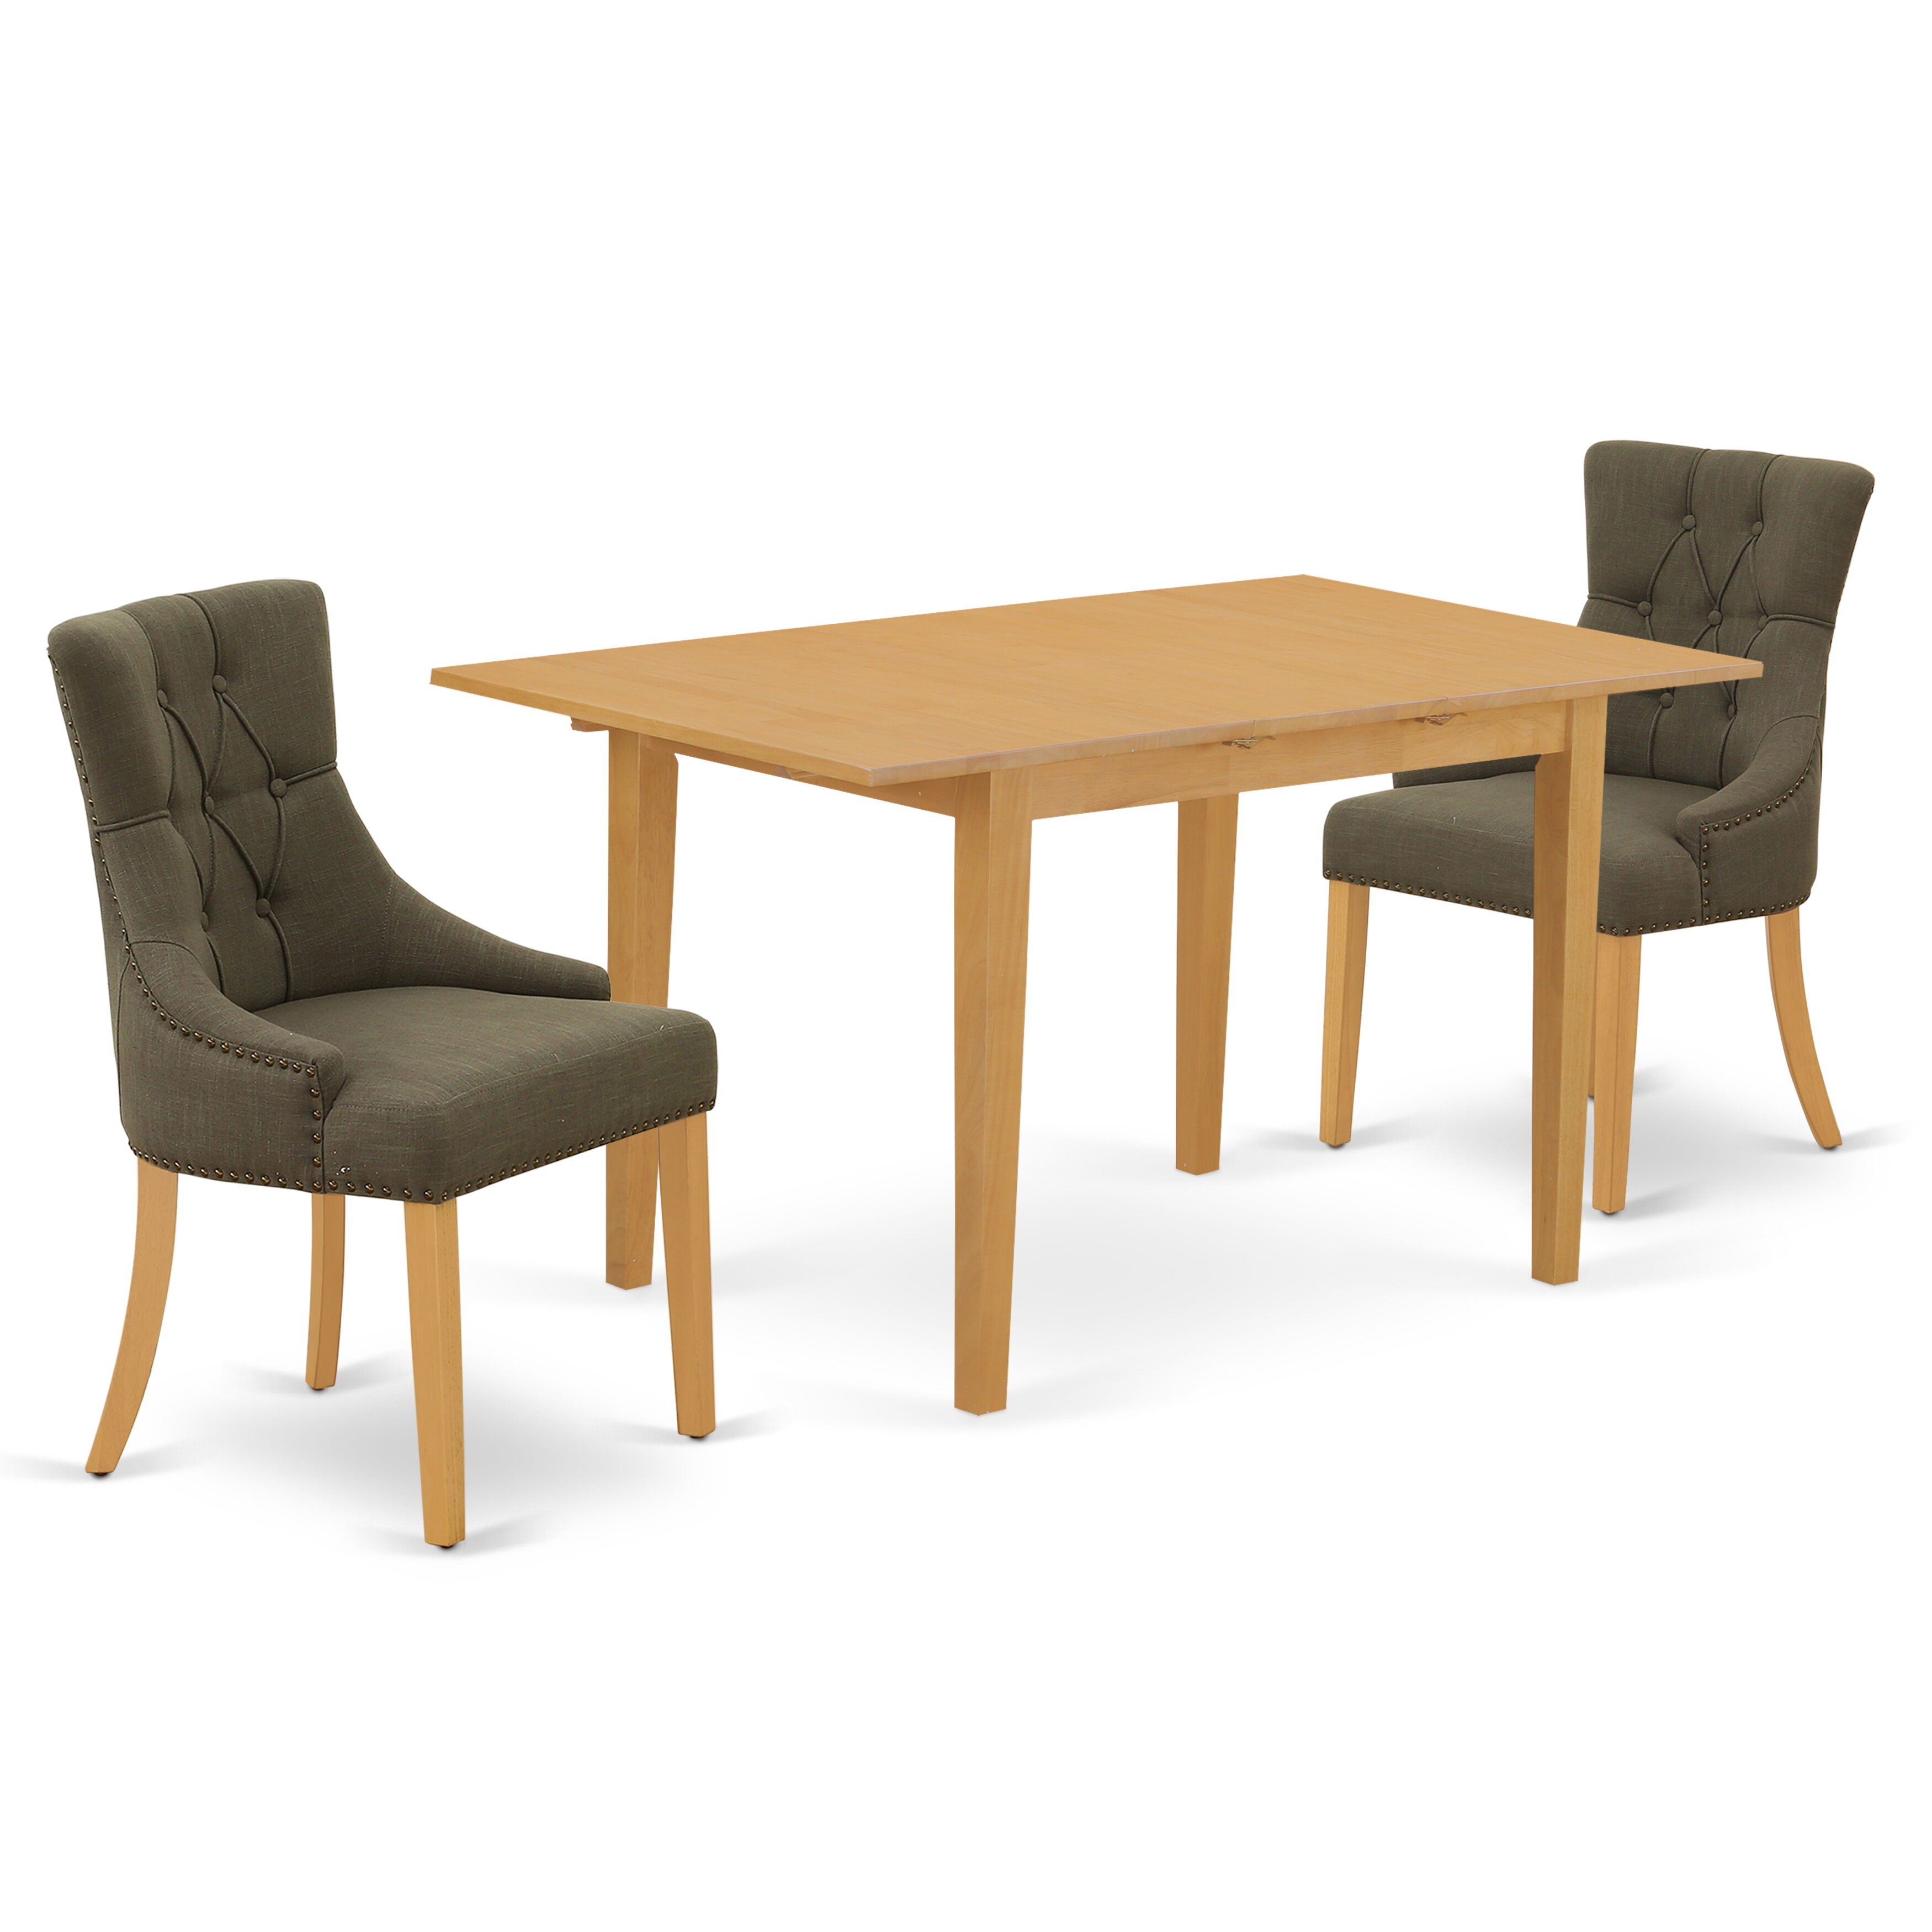 isse 3 piece solid wood dining set